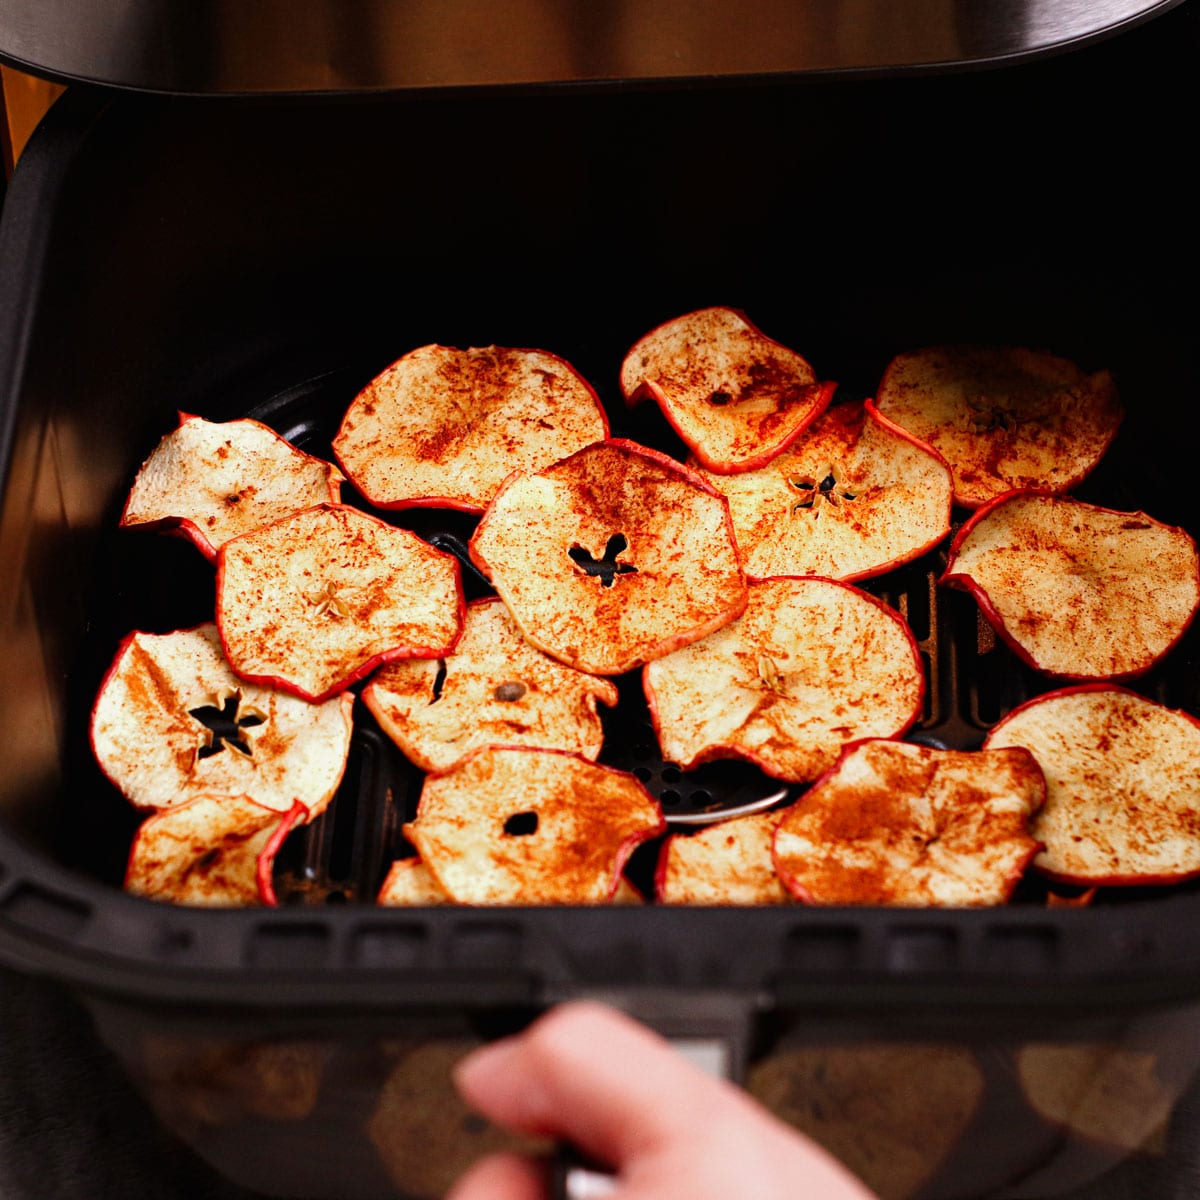 Cooking apple chips in air fryer